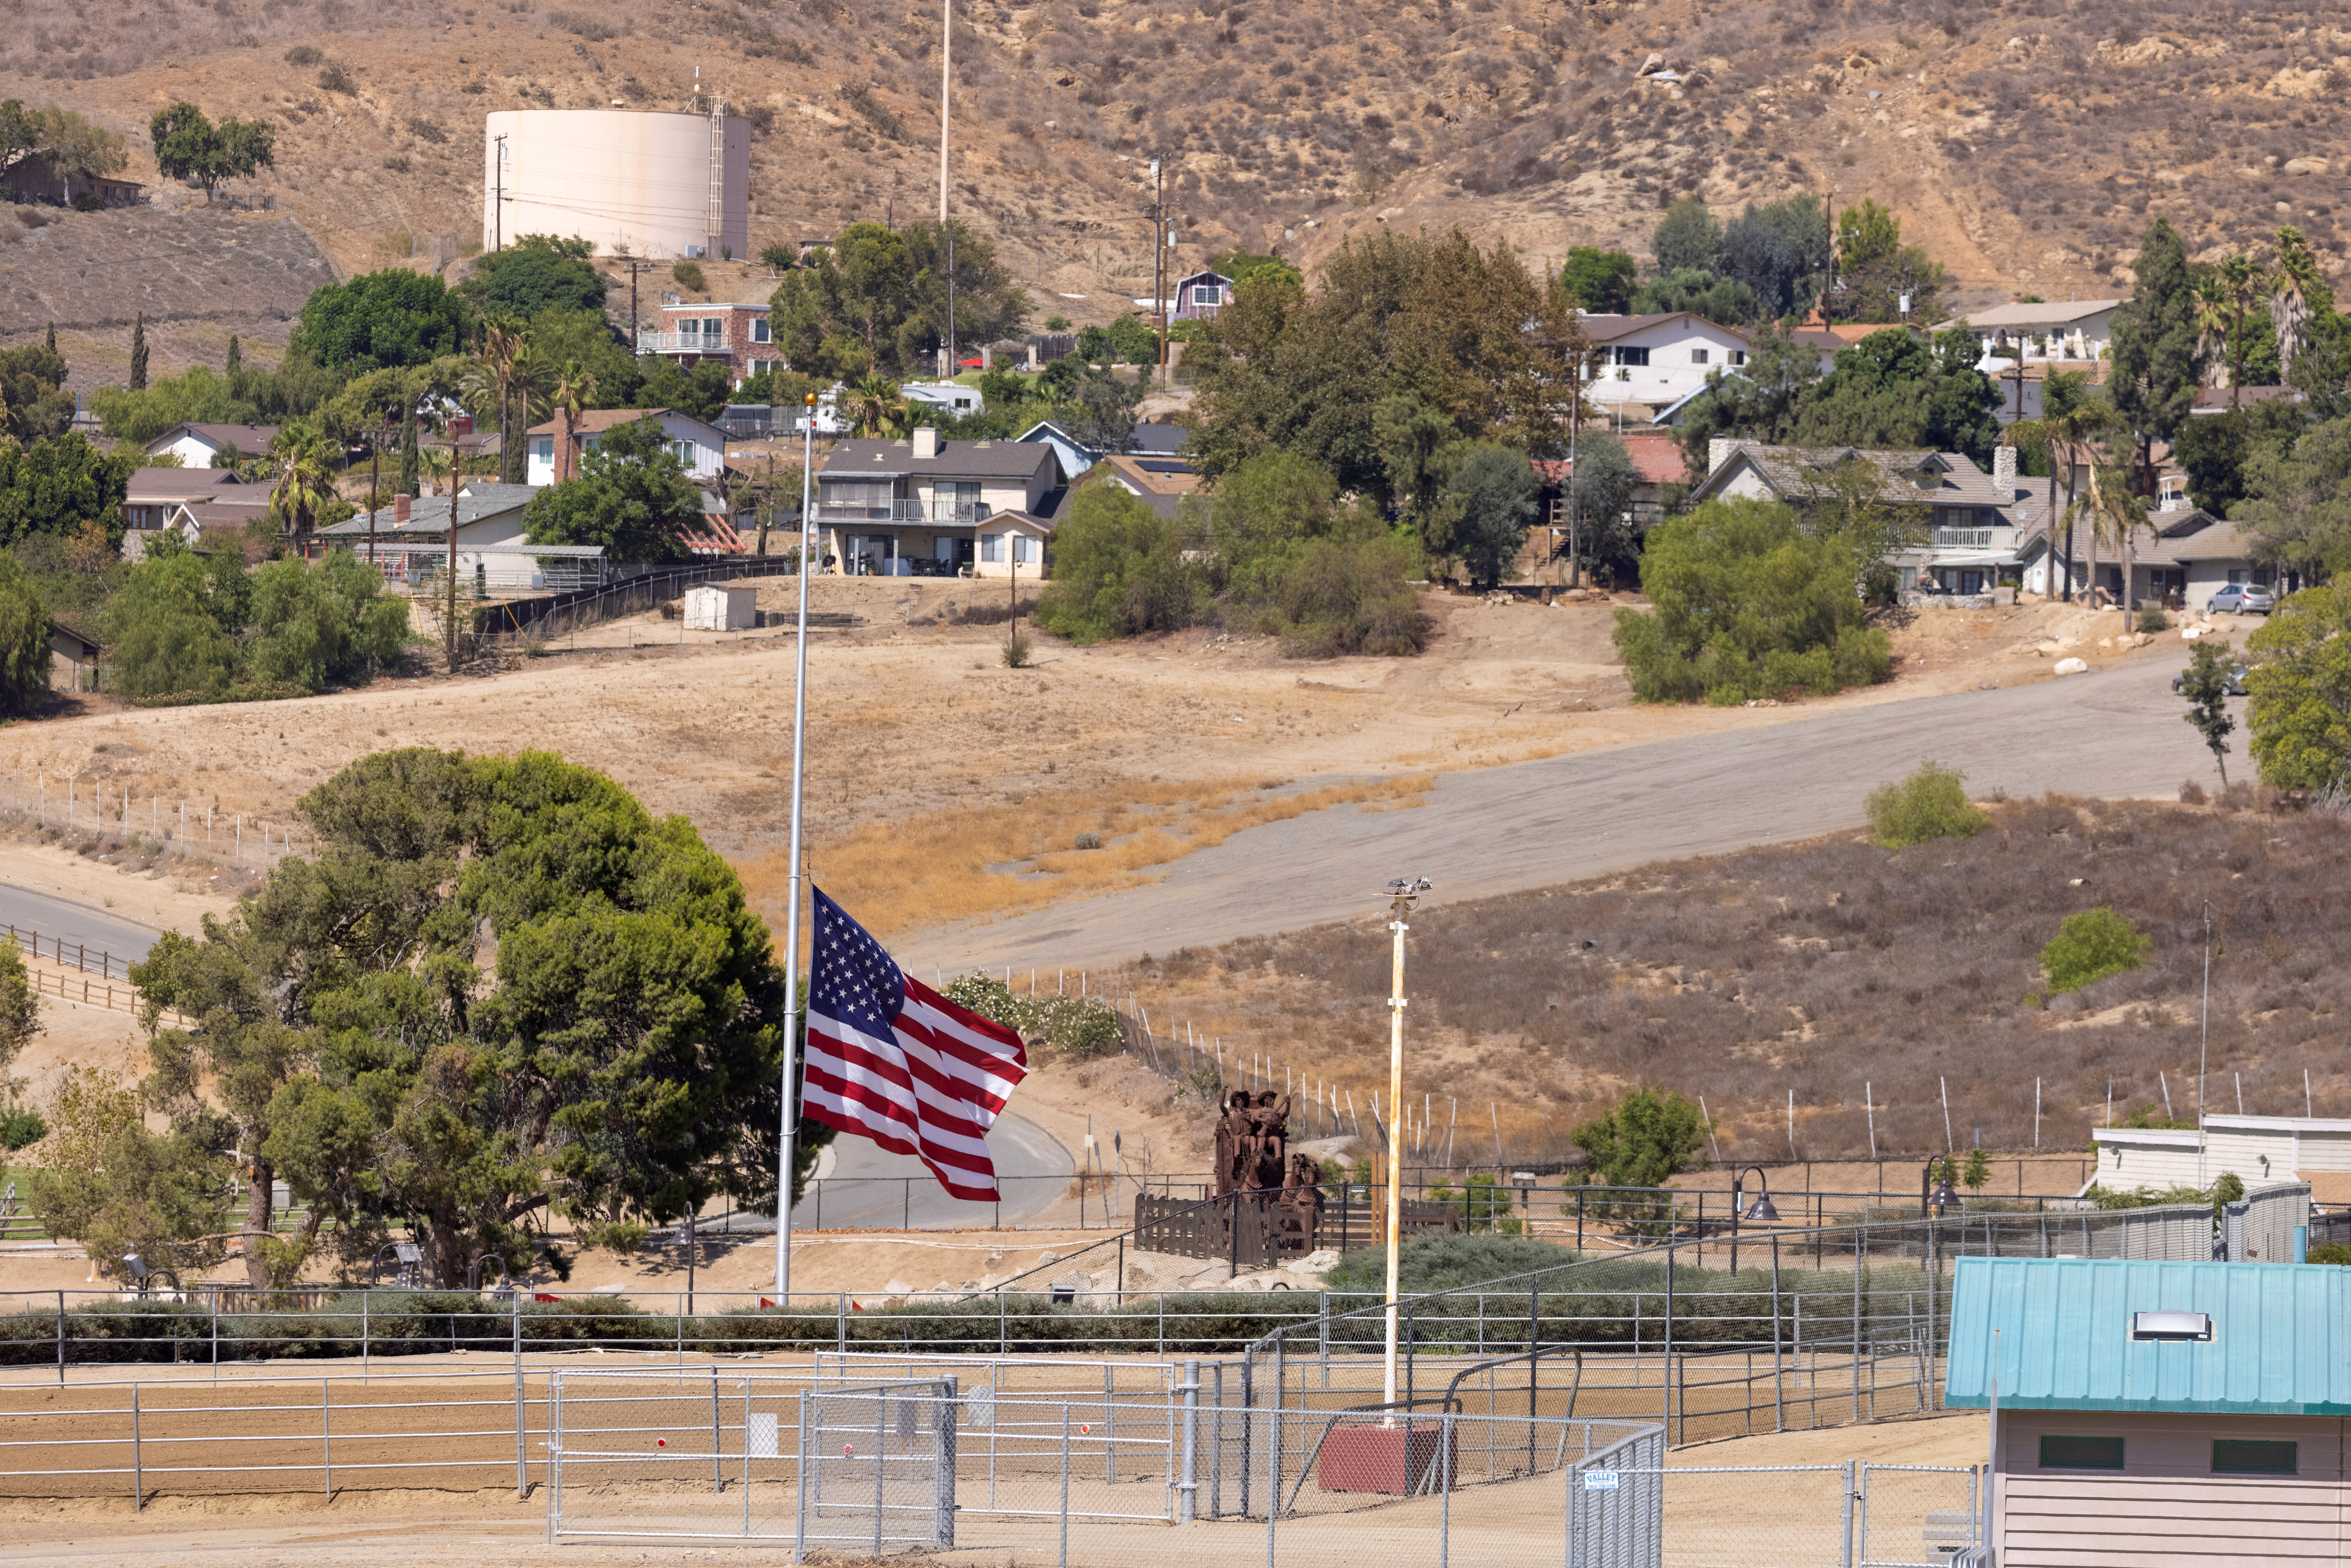 The American flag flies at half-mast in the home town of Marine Corps Lance Corporal Kareem Nikoui in Norco